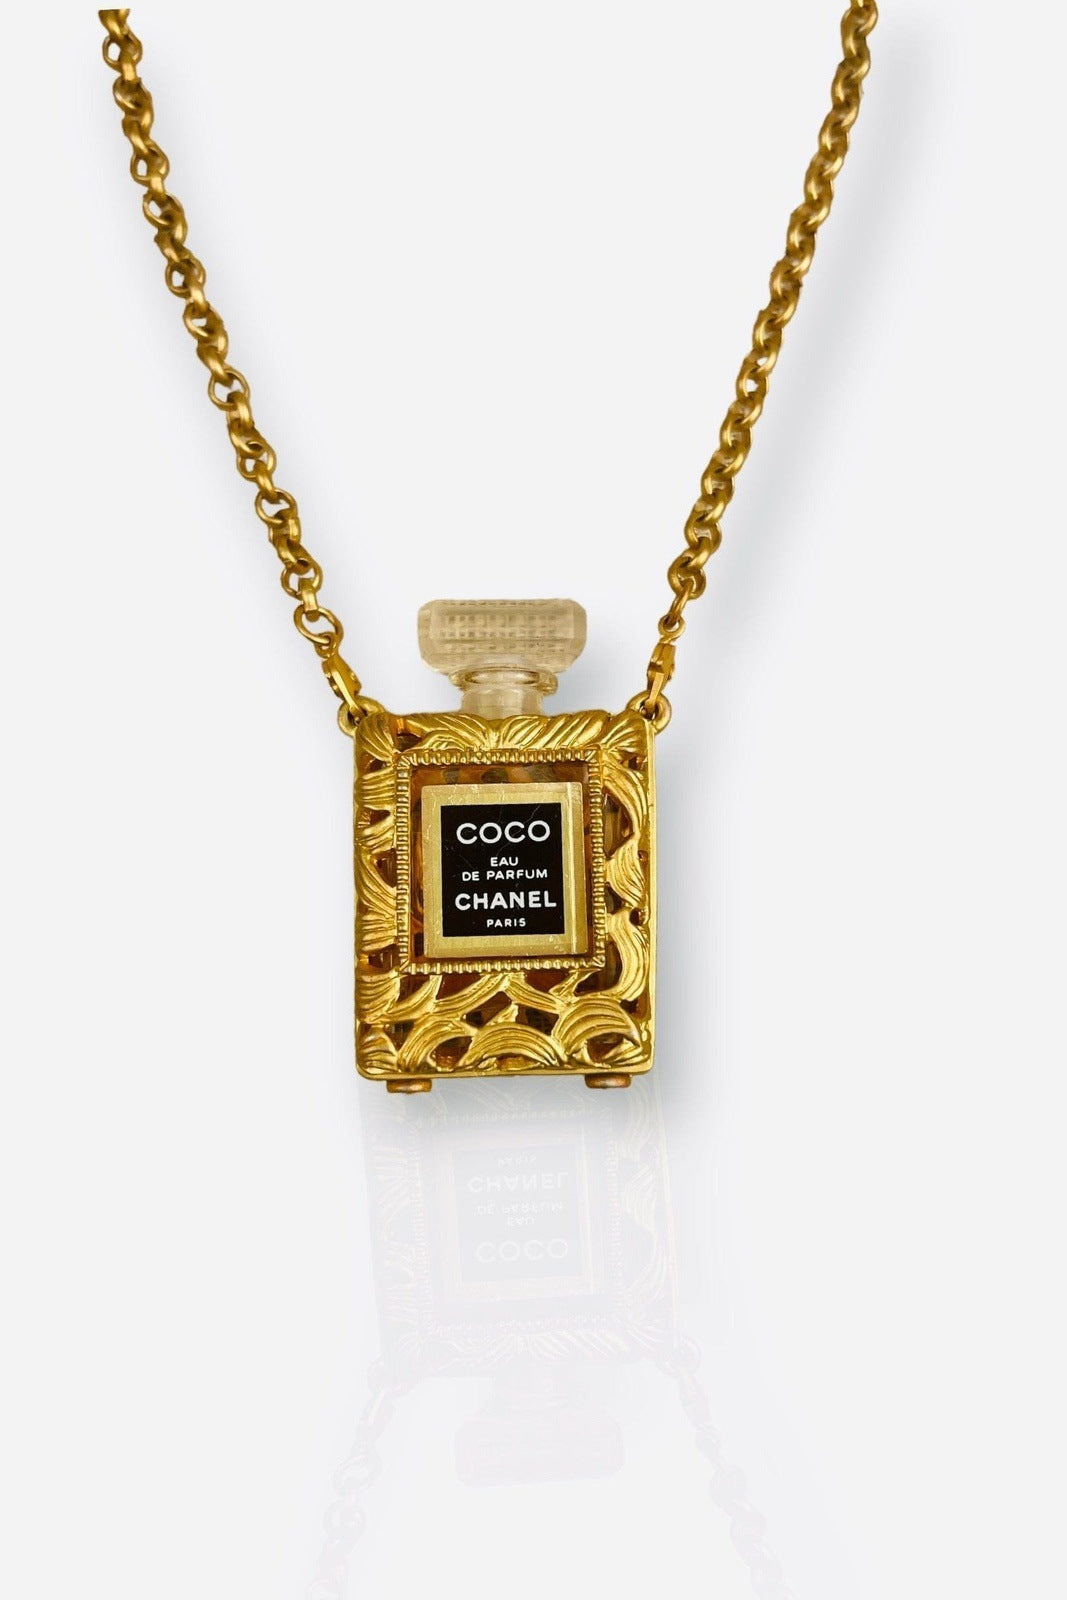 Auth Chanel Gold Black Chain COCO Perfume Bottle Necklace Vintage  1A260010n"